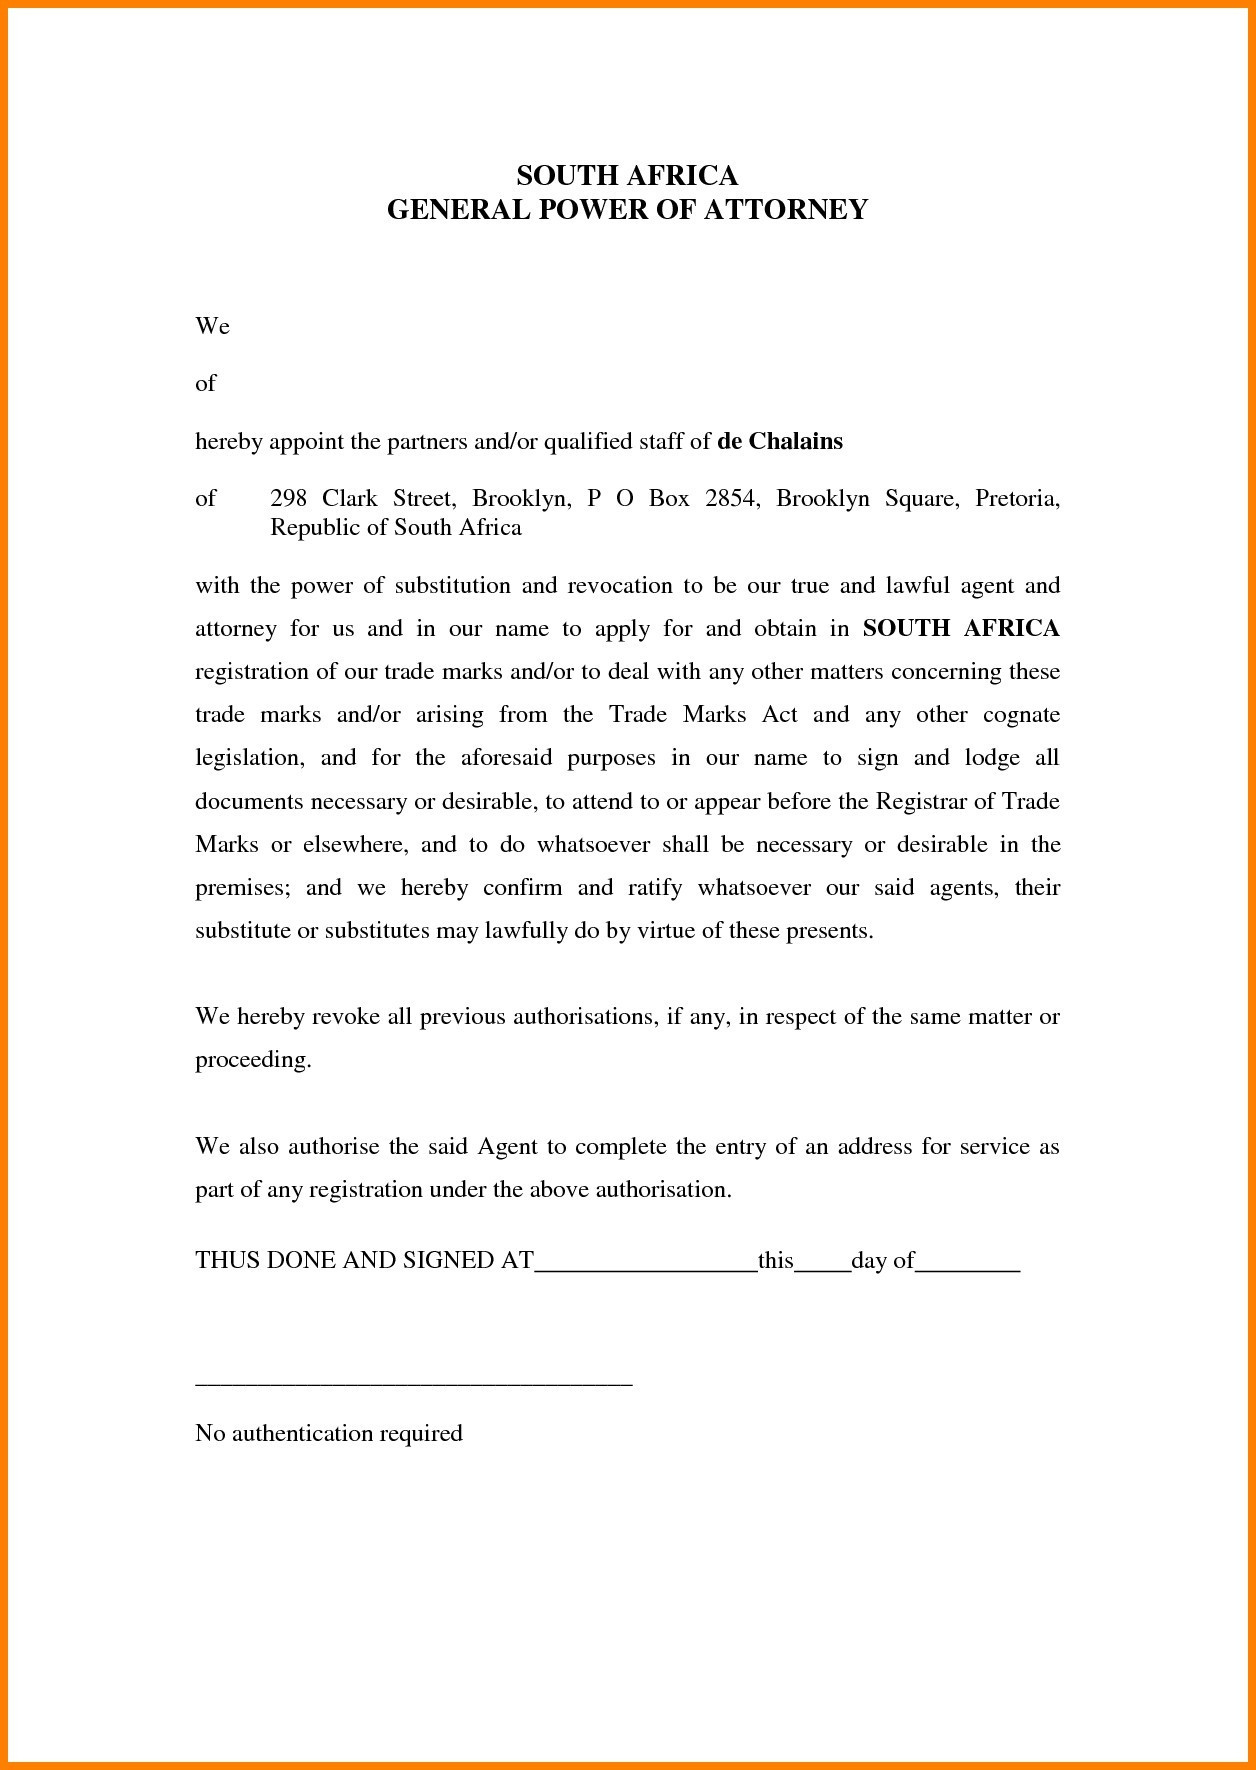 notarized letter of guardianship in pennsylvania